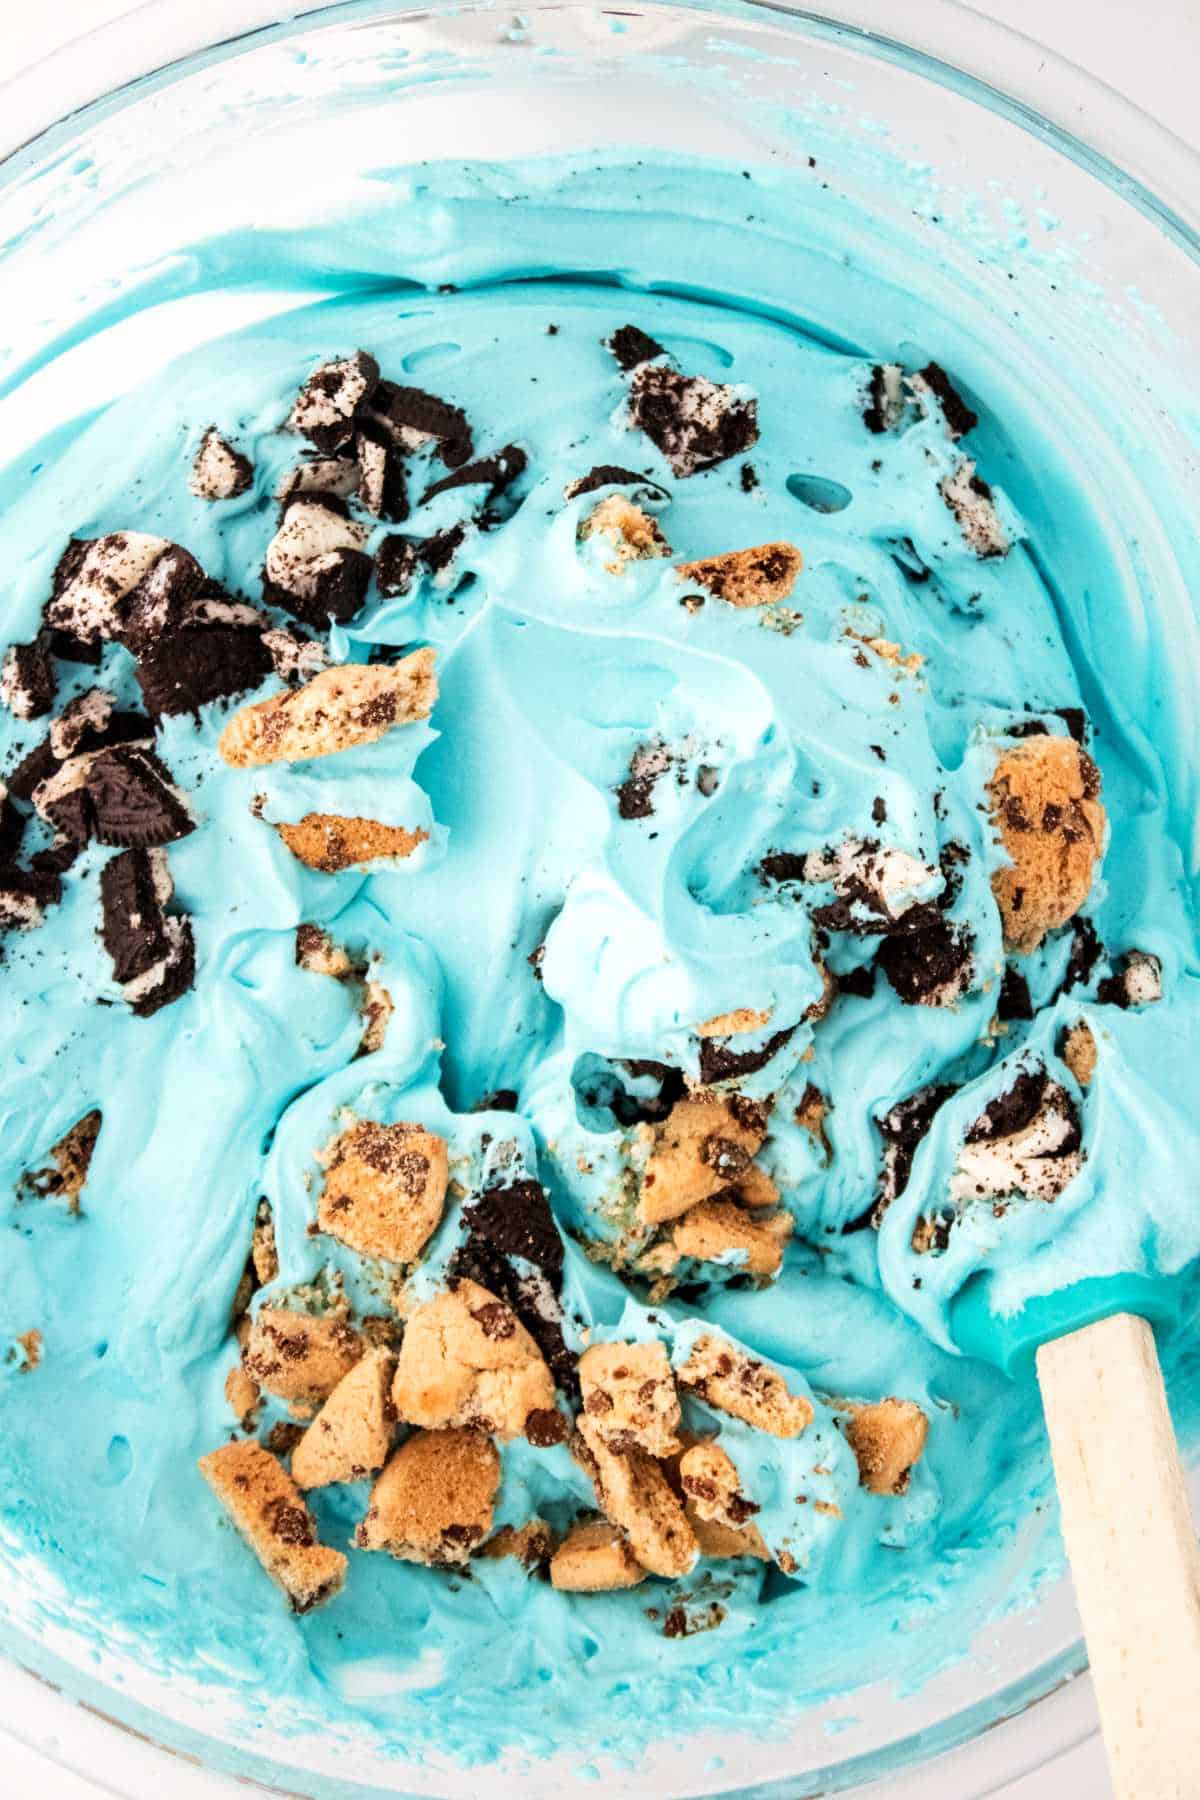 Folding crushed cookies into blue cream mixture.